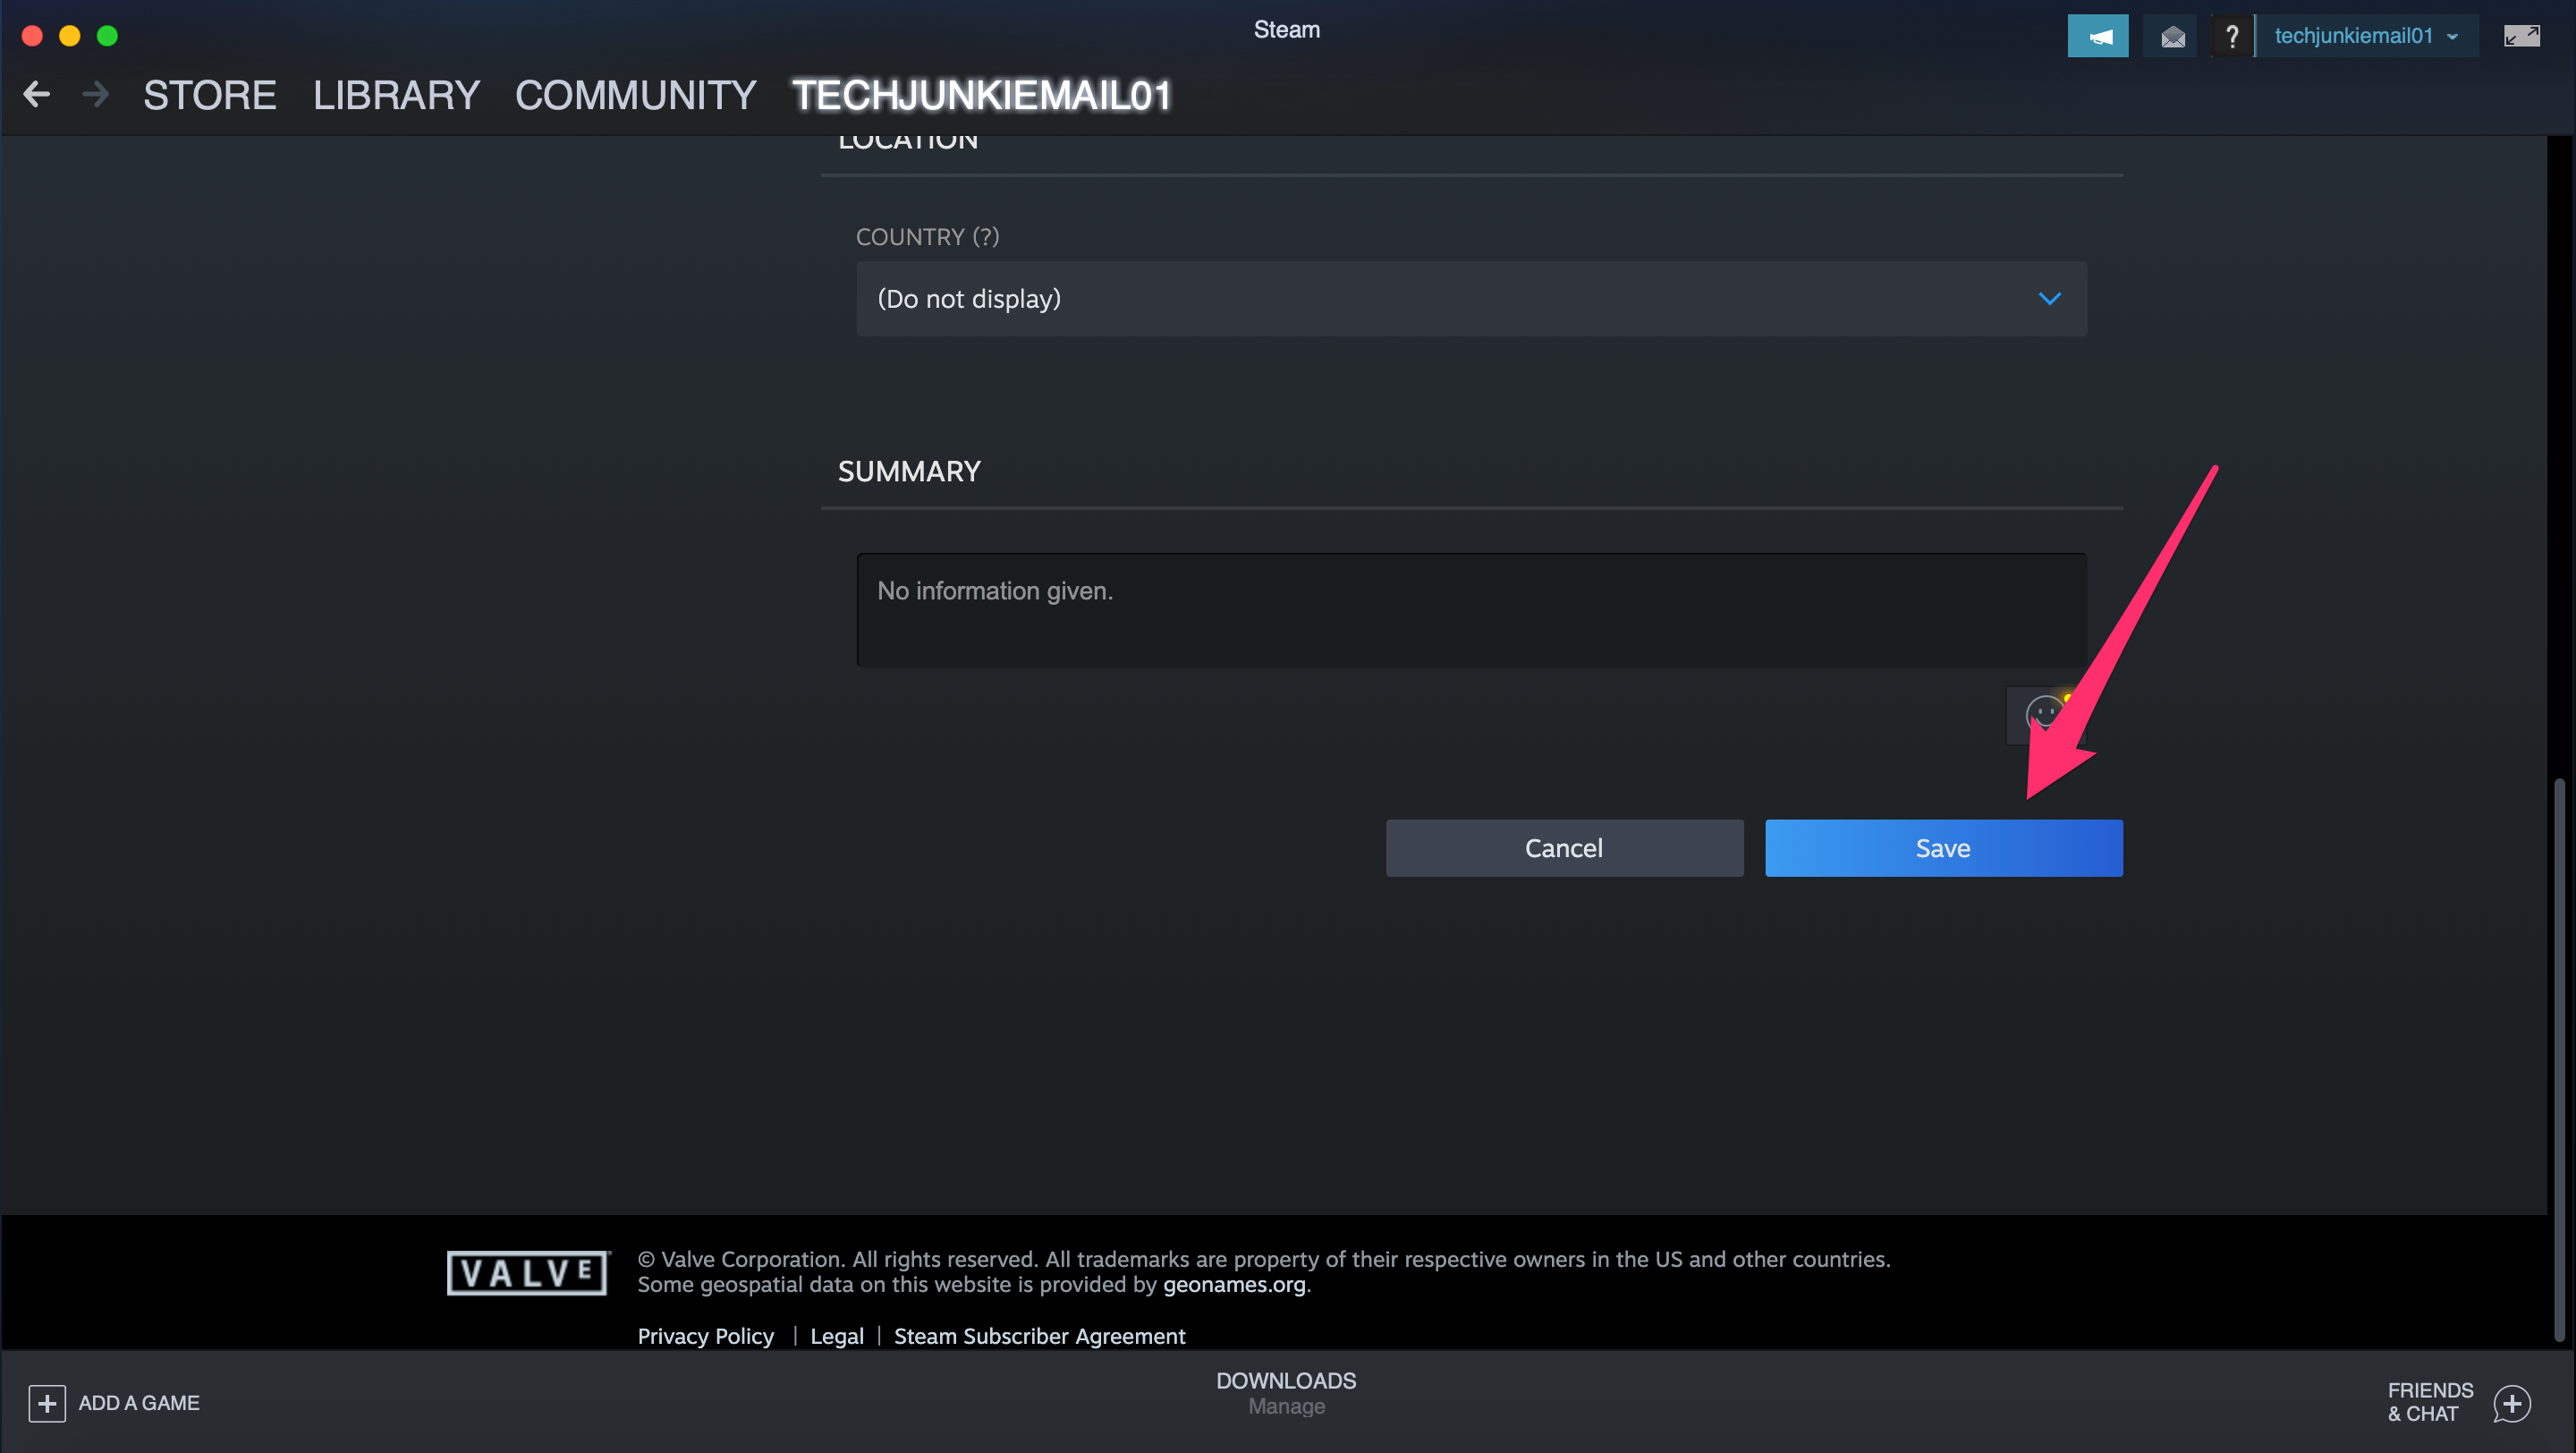 You are not currently logged in to a steam account фото 32